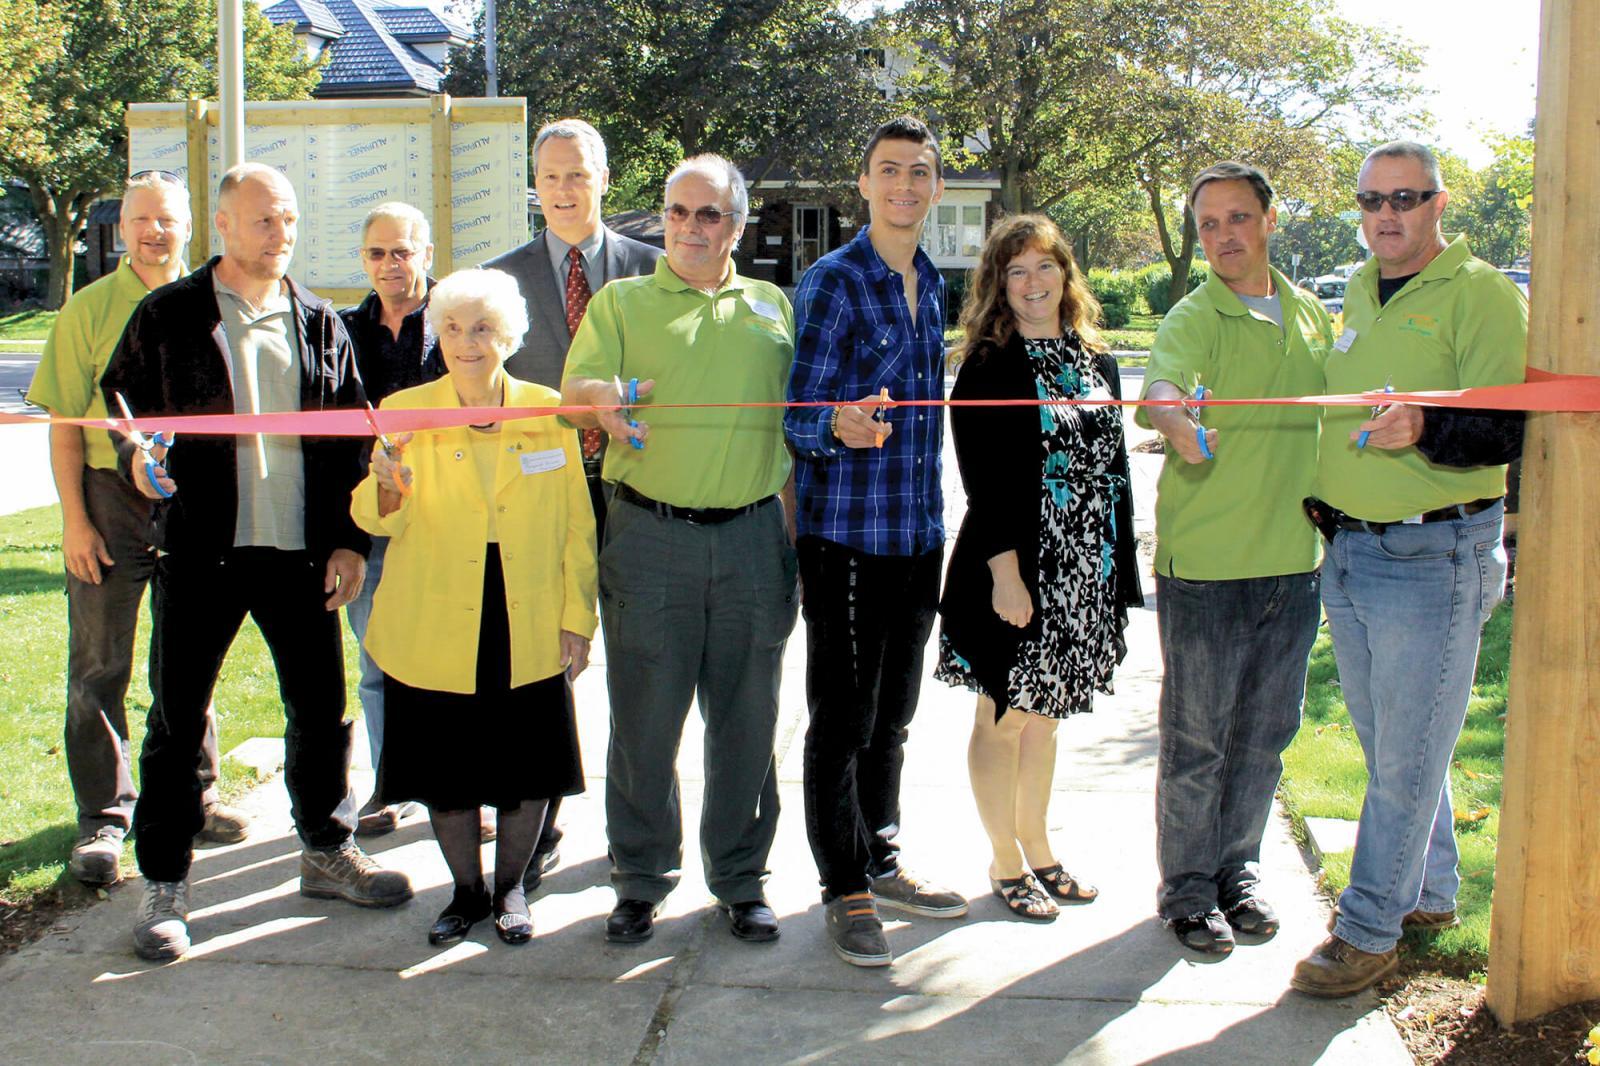 National Tree Day was a proud time for the Waterloo Chapter as members took part in the cutting of the ribbon to open new garden area at Elmira District Secondary School.